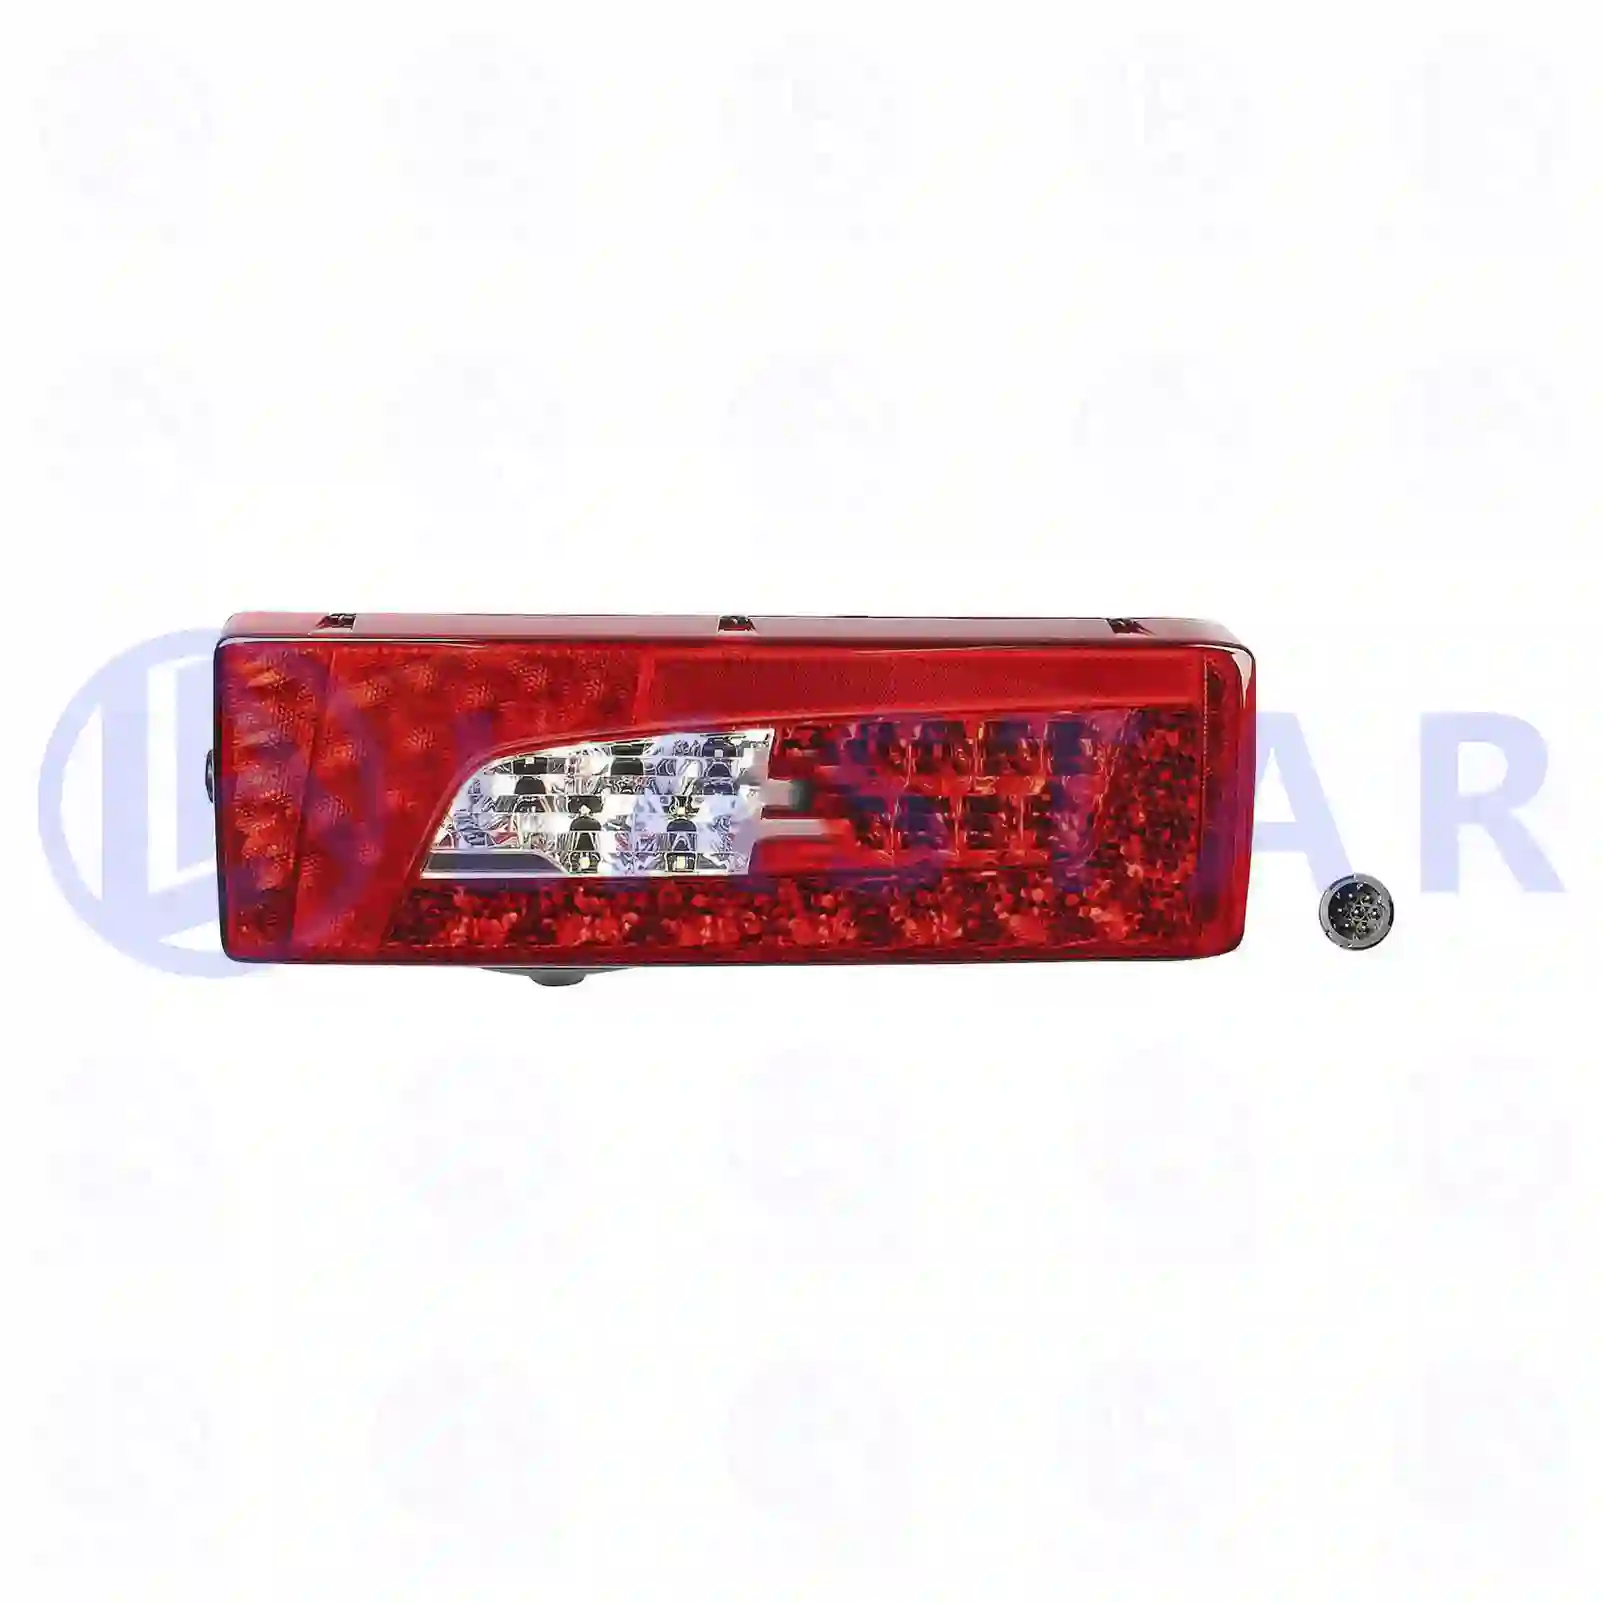 Tail lamp, right, with reverse alarm, 77713314, 1905043, 2241859, 2380954 ||  77713314 Lastar Spare Part | Truck Spare Parts, Auotomotive Spare Parts Tail lamp, right, with reverse alarm, 77713314, 1905043, 2241859, 2380954 ||  77713314 Lastar Spare Part | Truck Spare Parts, Auotomotive Spare Parts